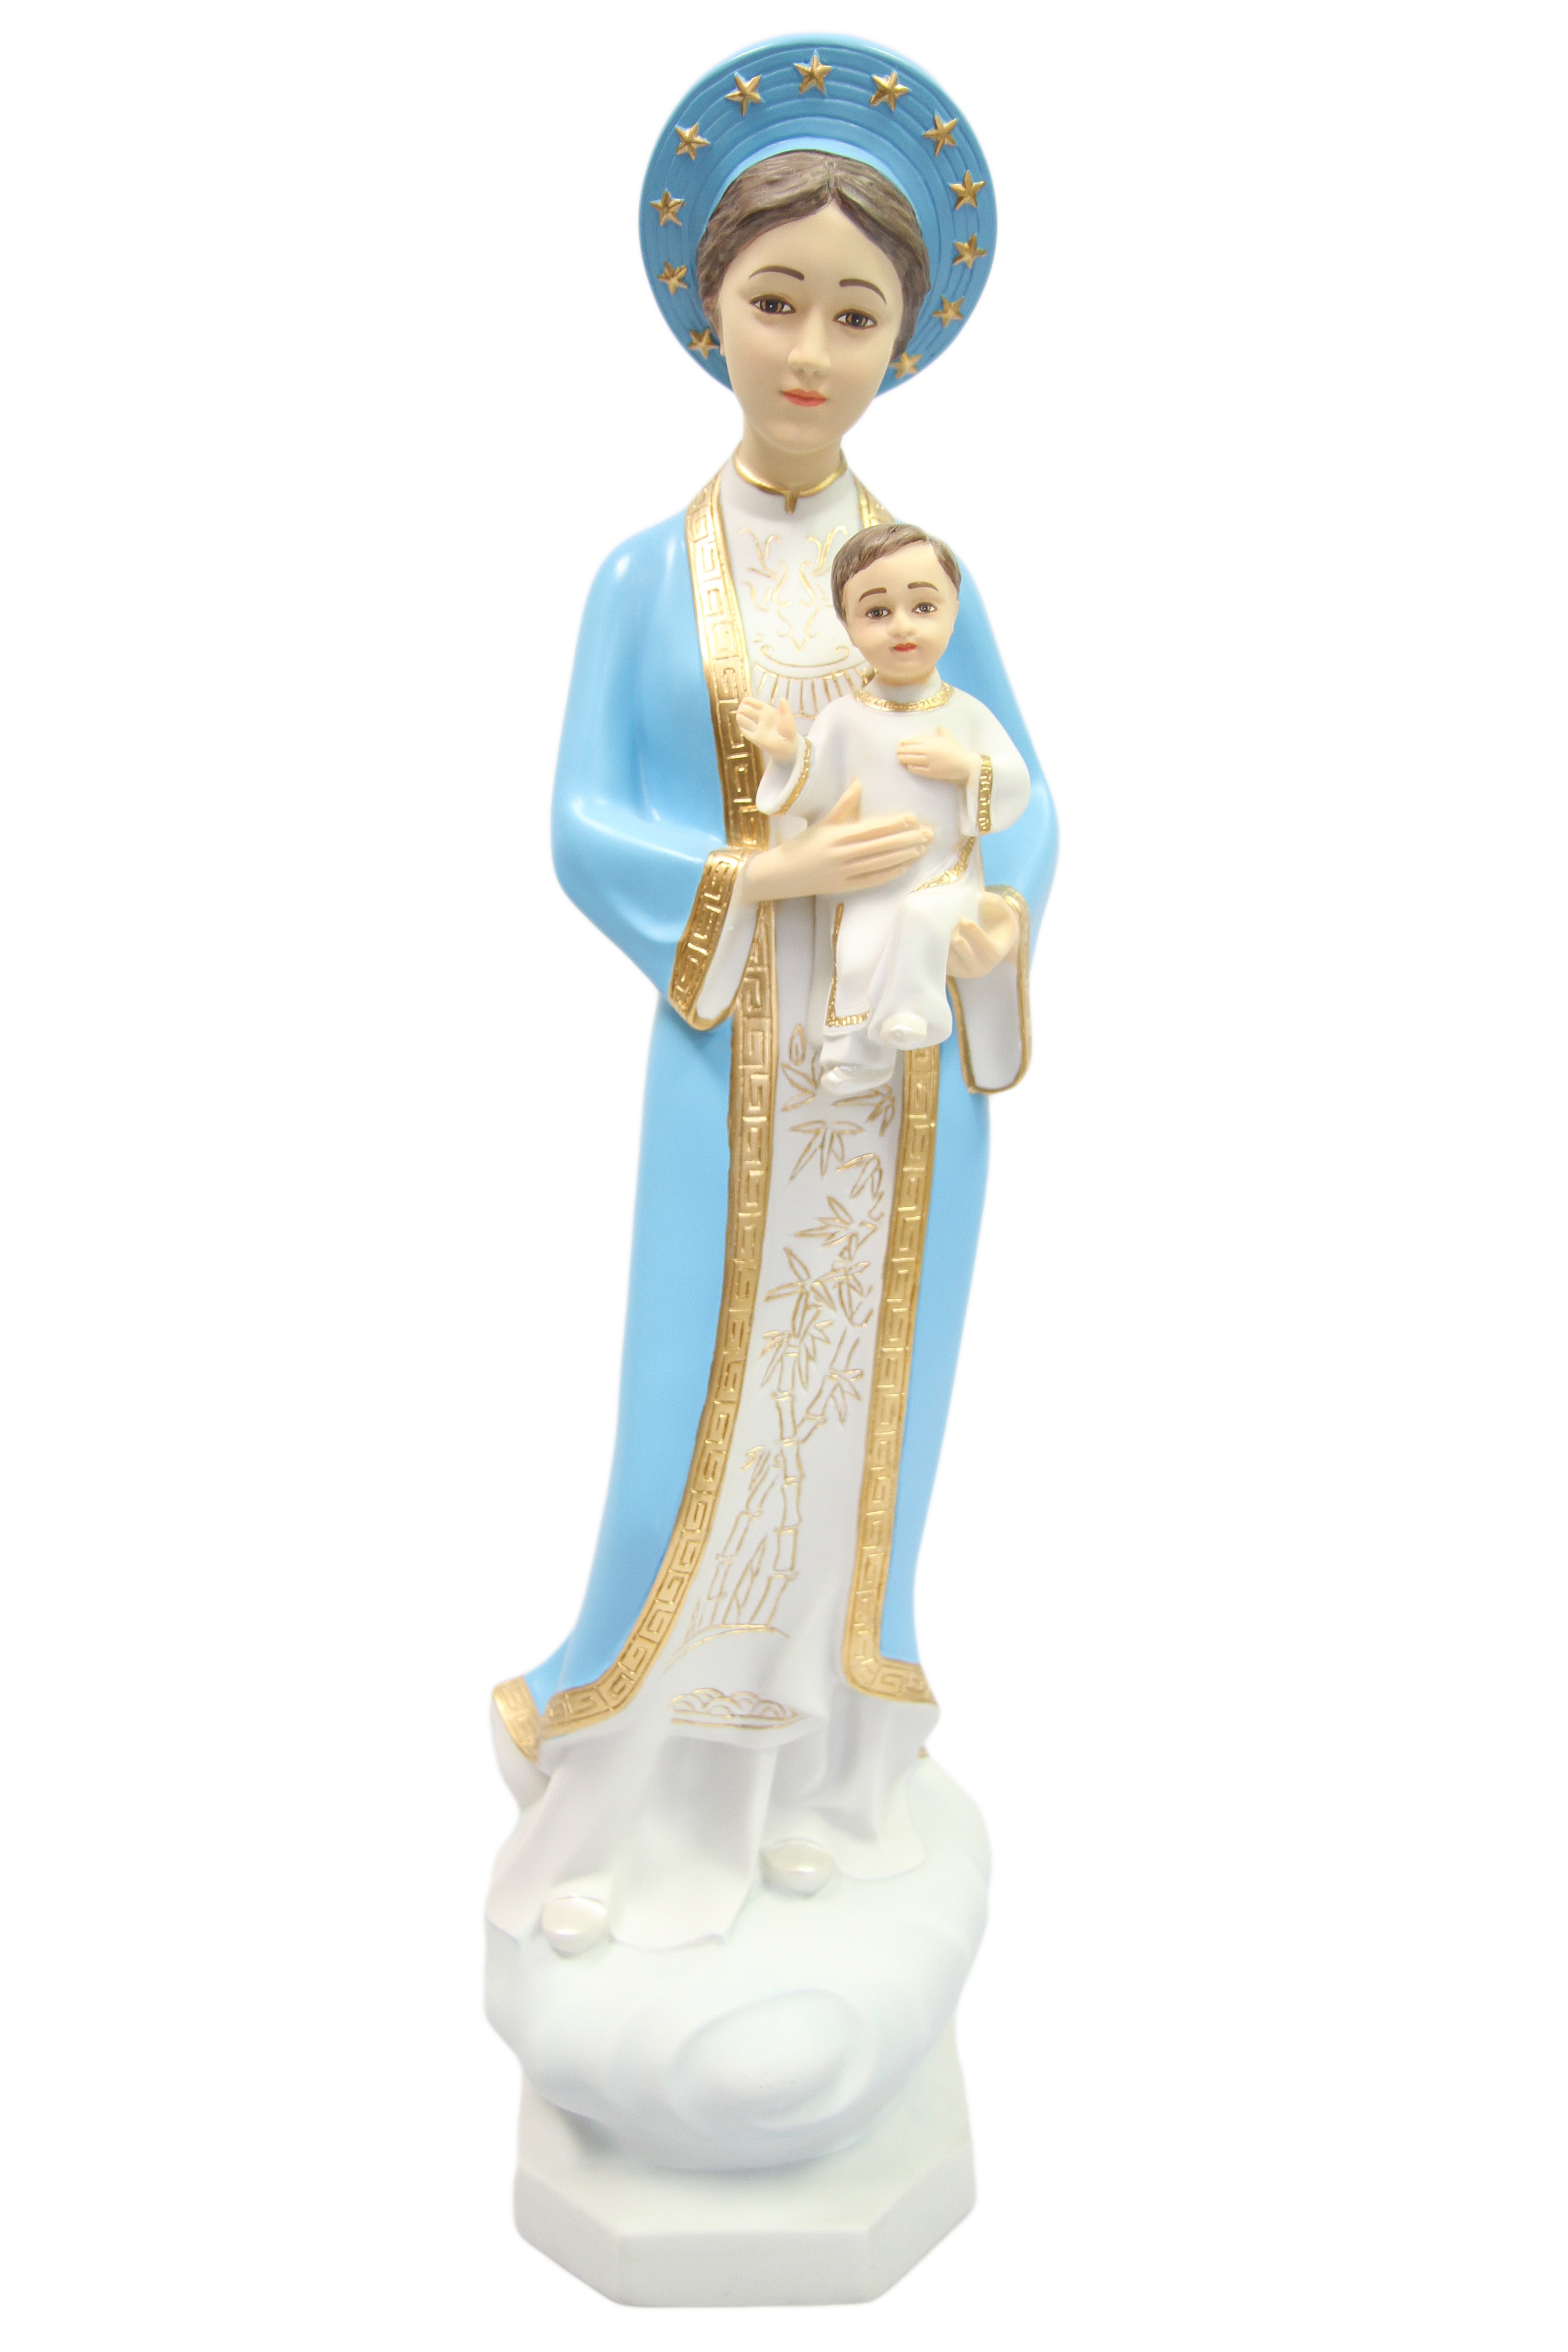 26" Our Lady of La Vang Virgin Mary Blessed Mother Catholic Religious Statue Figurine Vittoria Collection